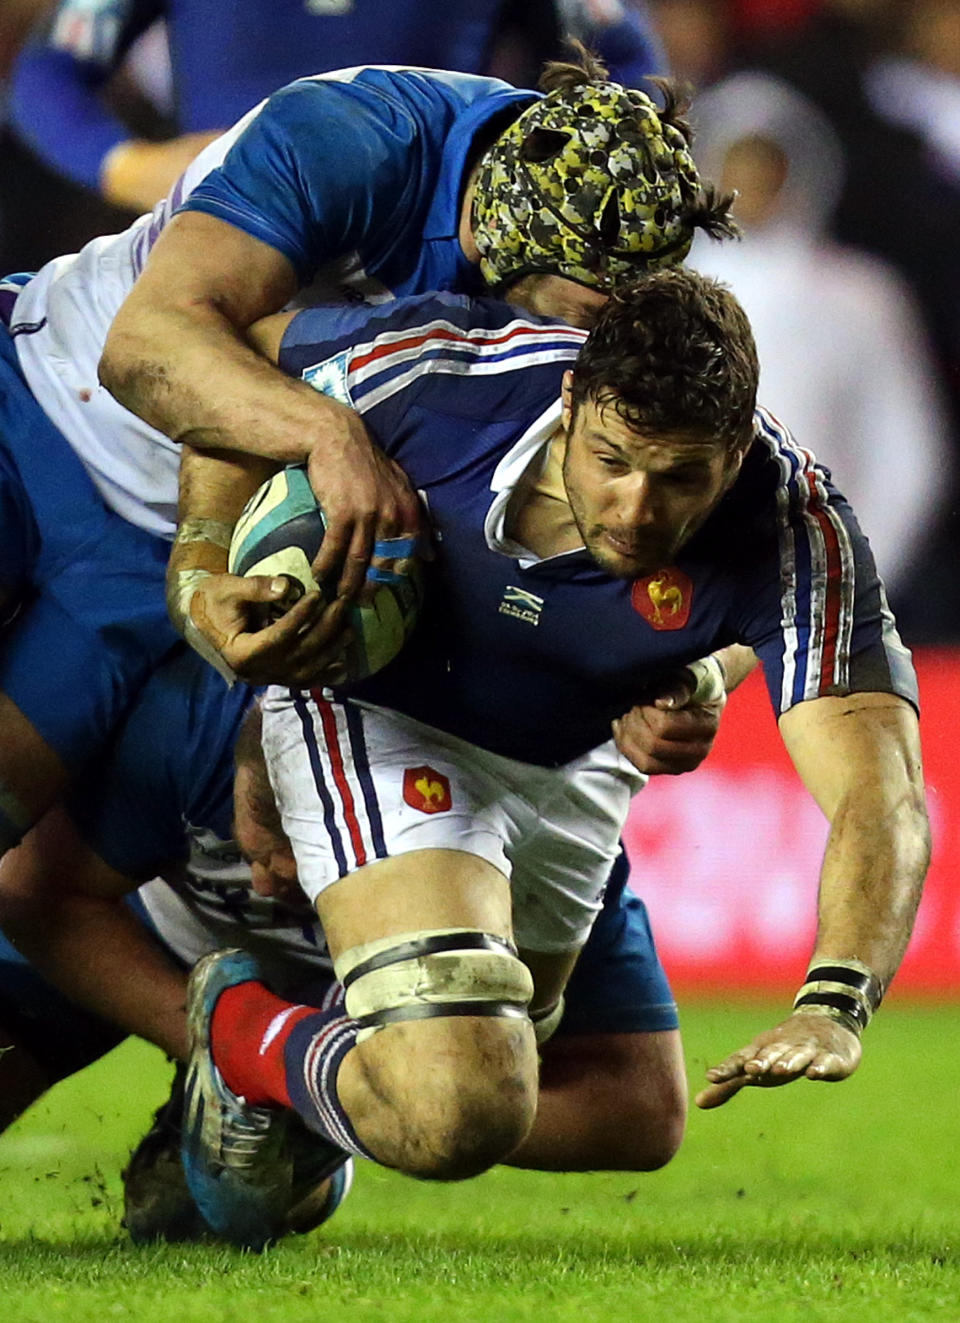 Scotland's Kelly Brown, left, tackles France's Damien Chouly, right, during their Six Nations rugby union international match at Murrayfield in Edinburgh, Scotland, Saturday March 8, 2014. (AP Photo/Scott Heppell)